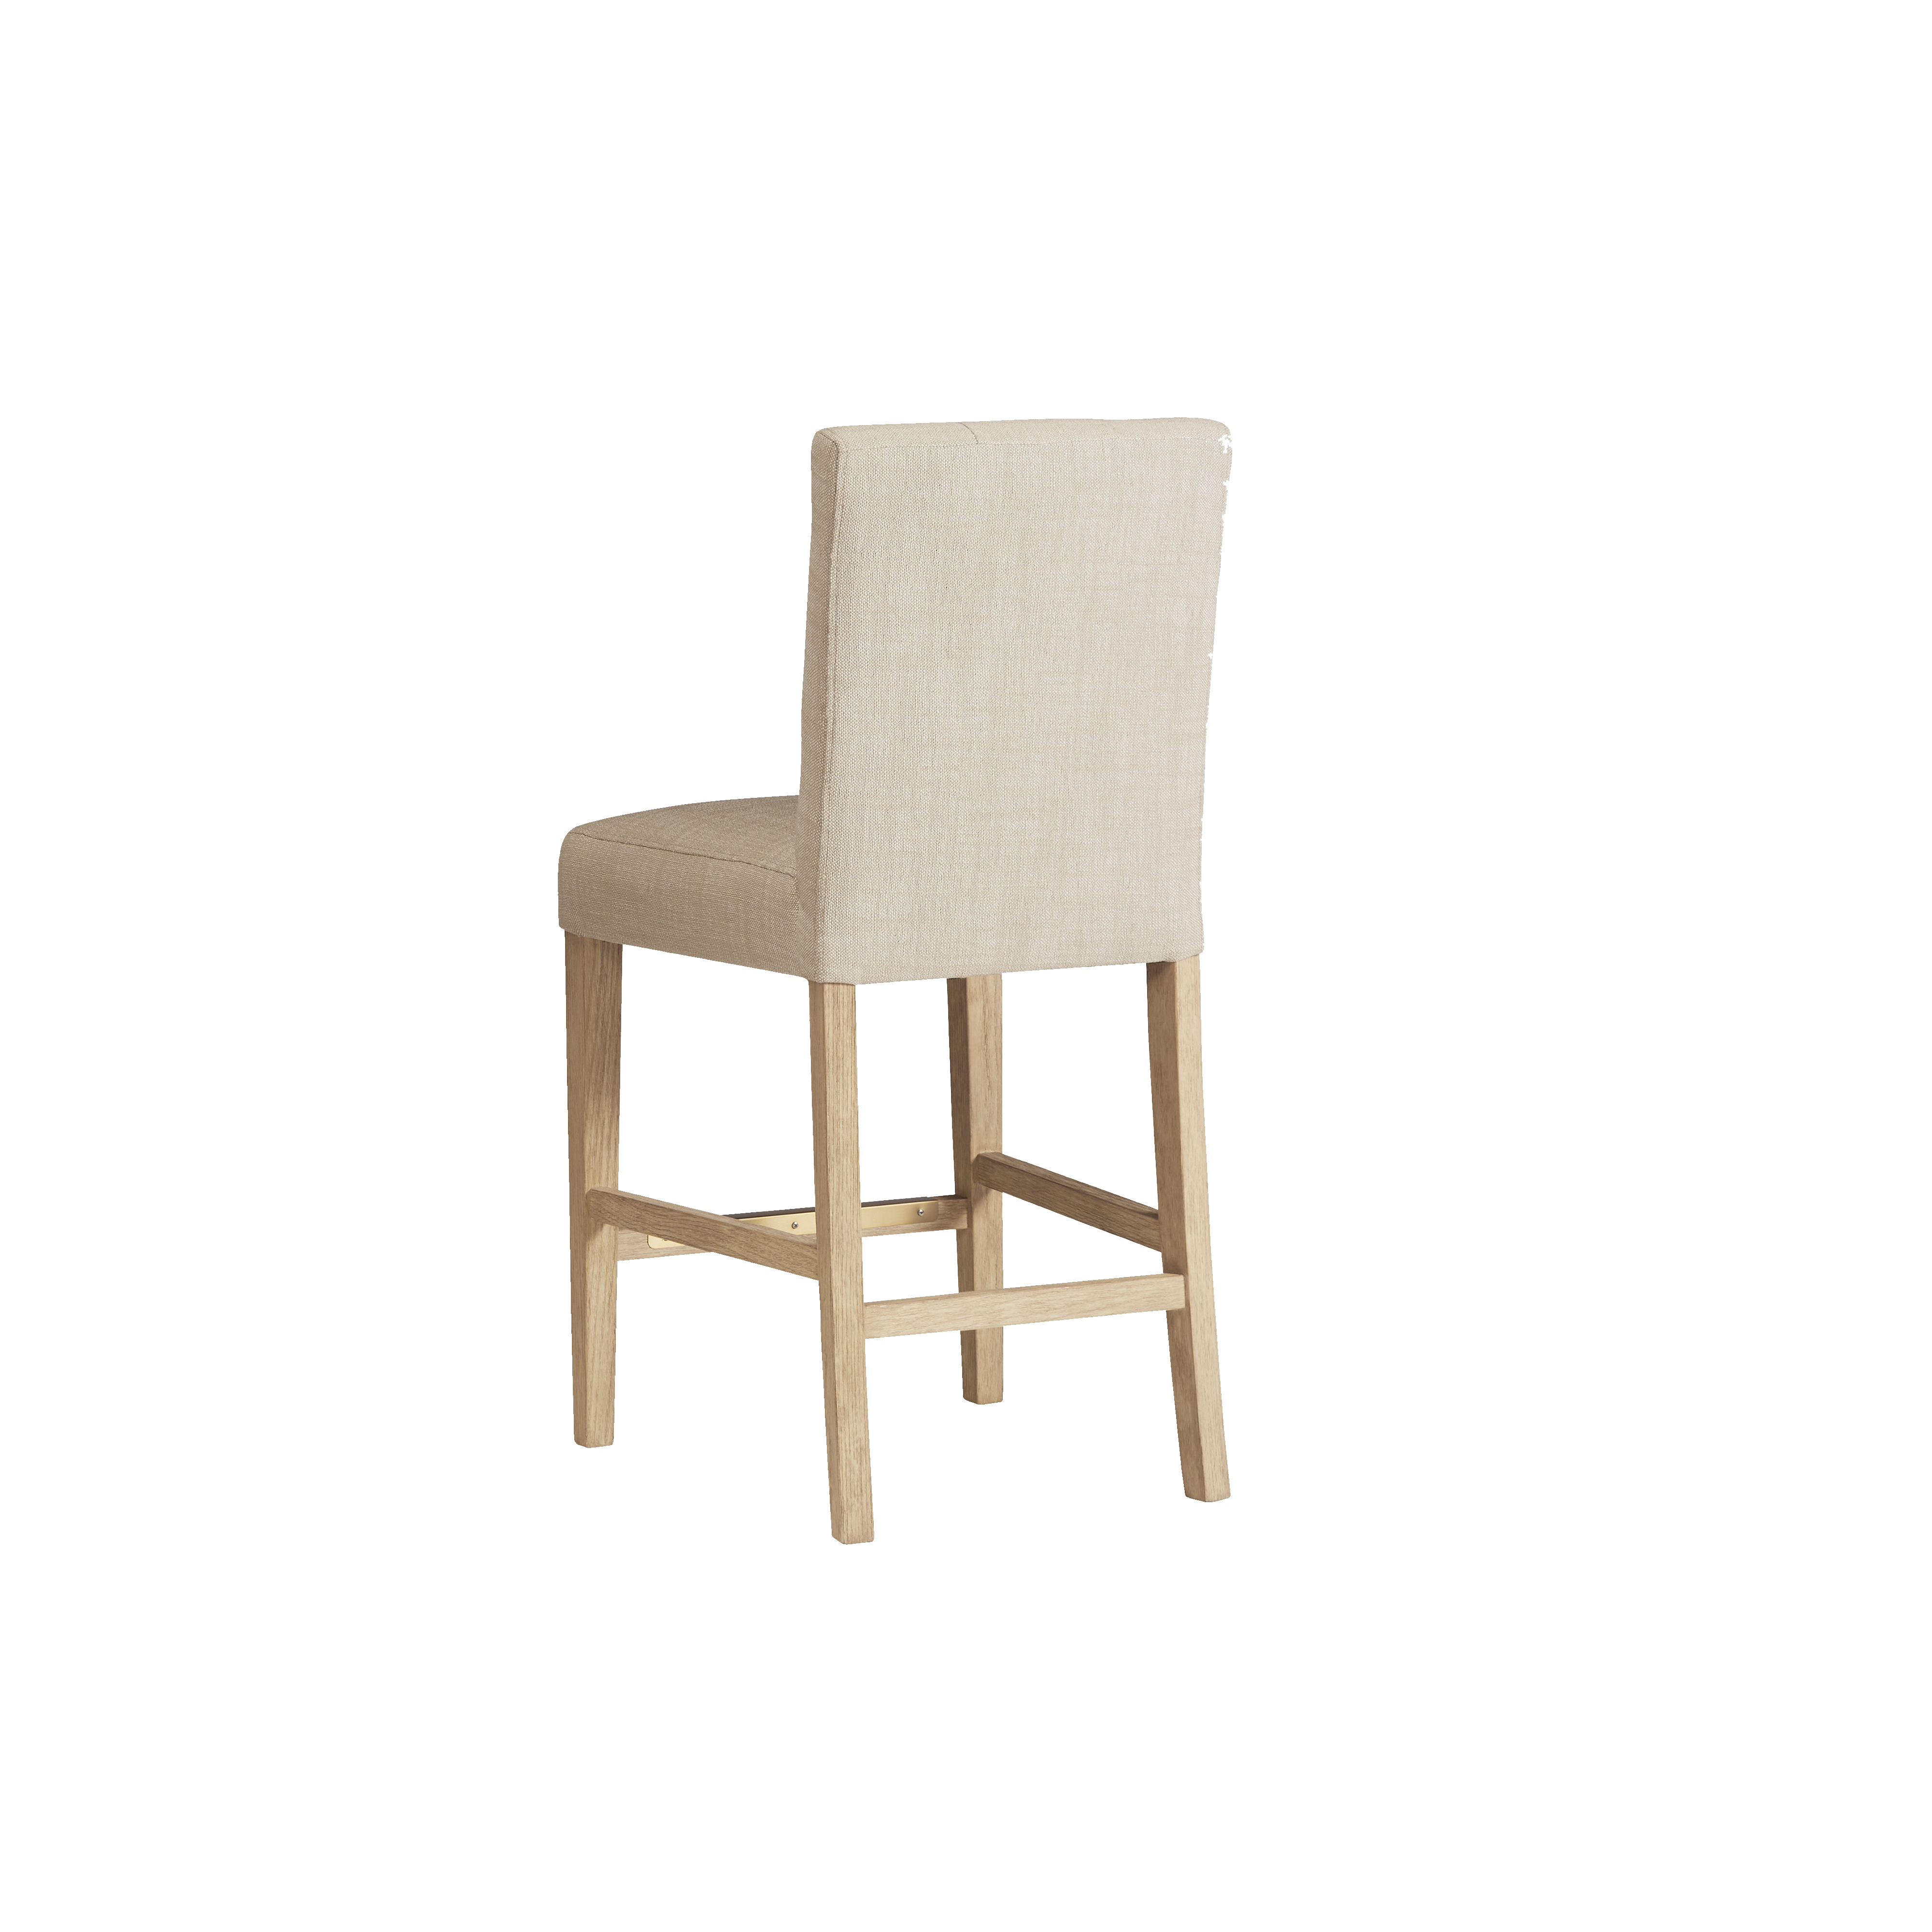 American Heritage Port Royal Counter Height Stool (White Oak)